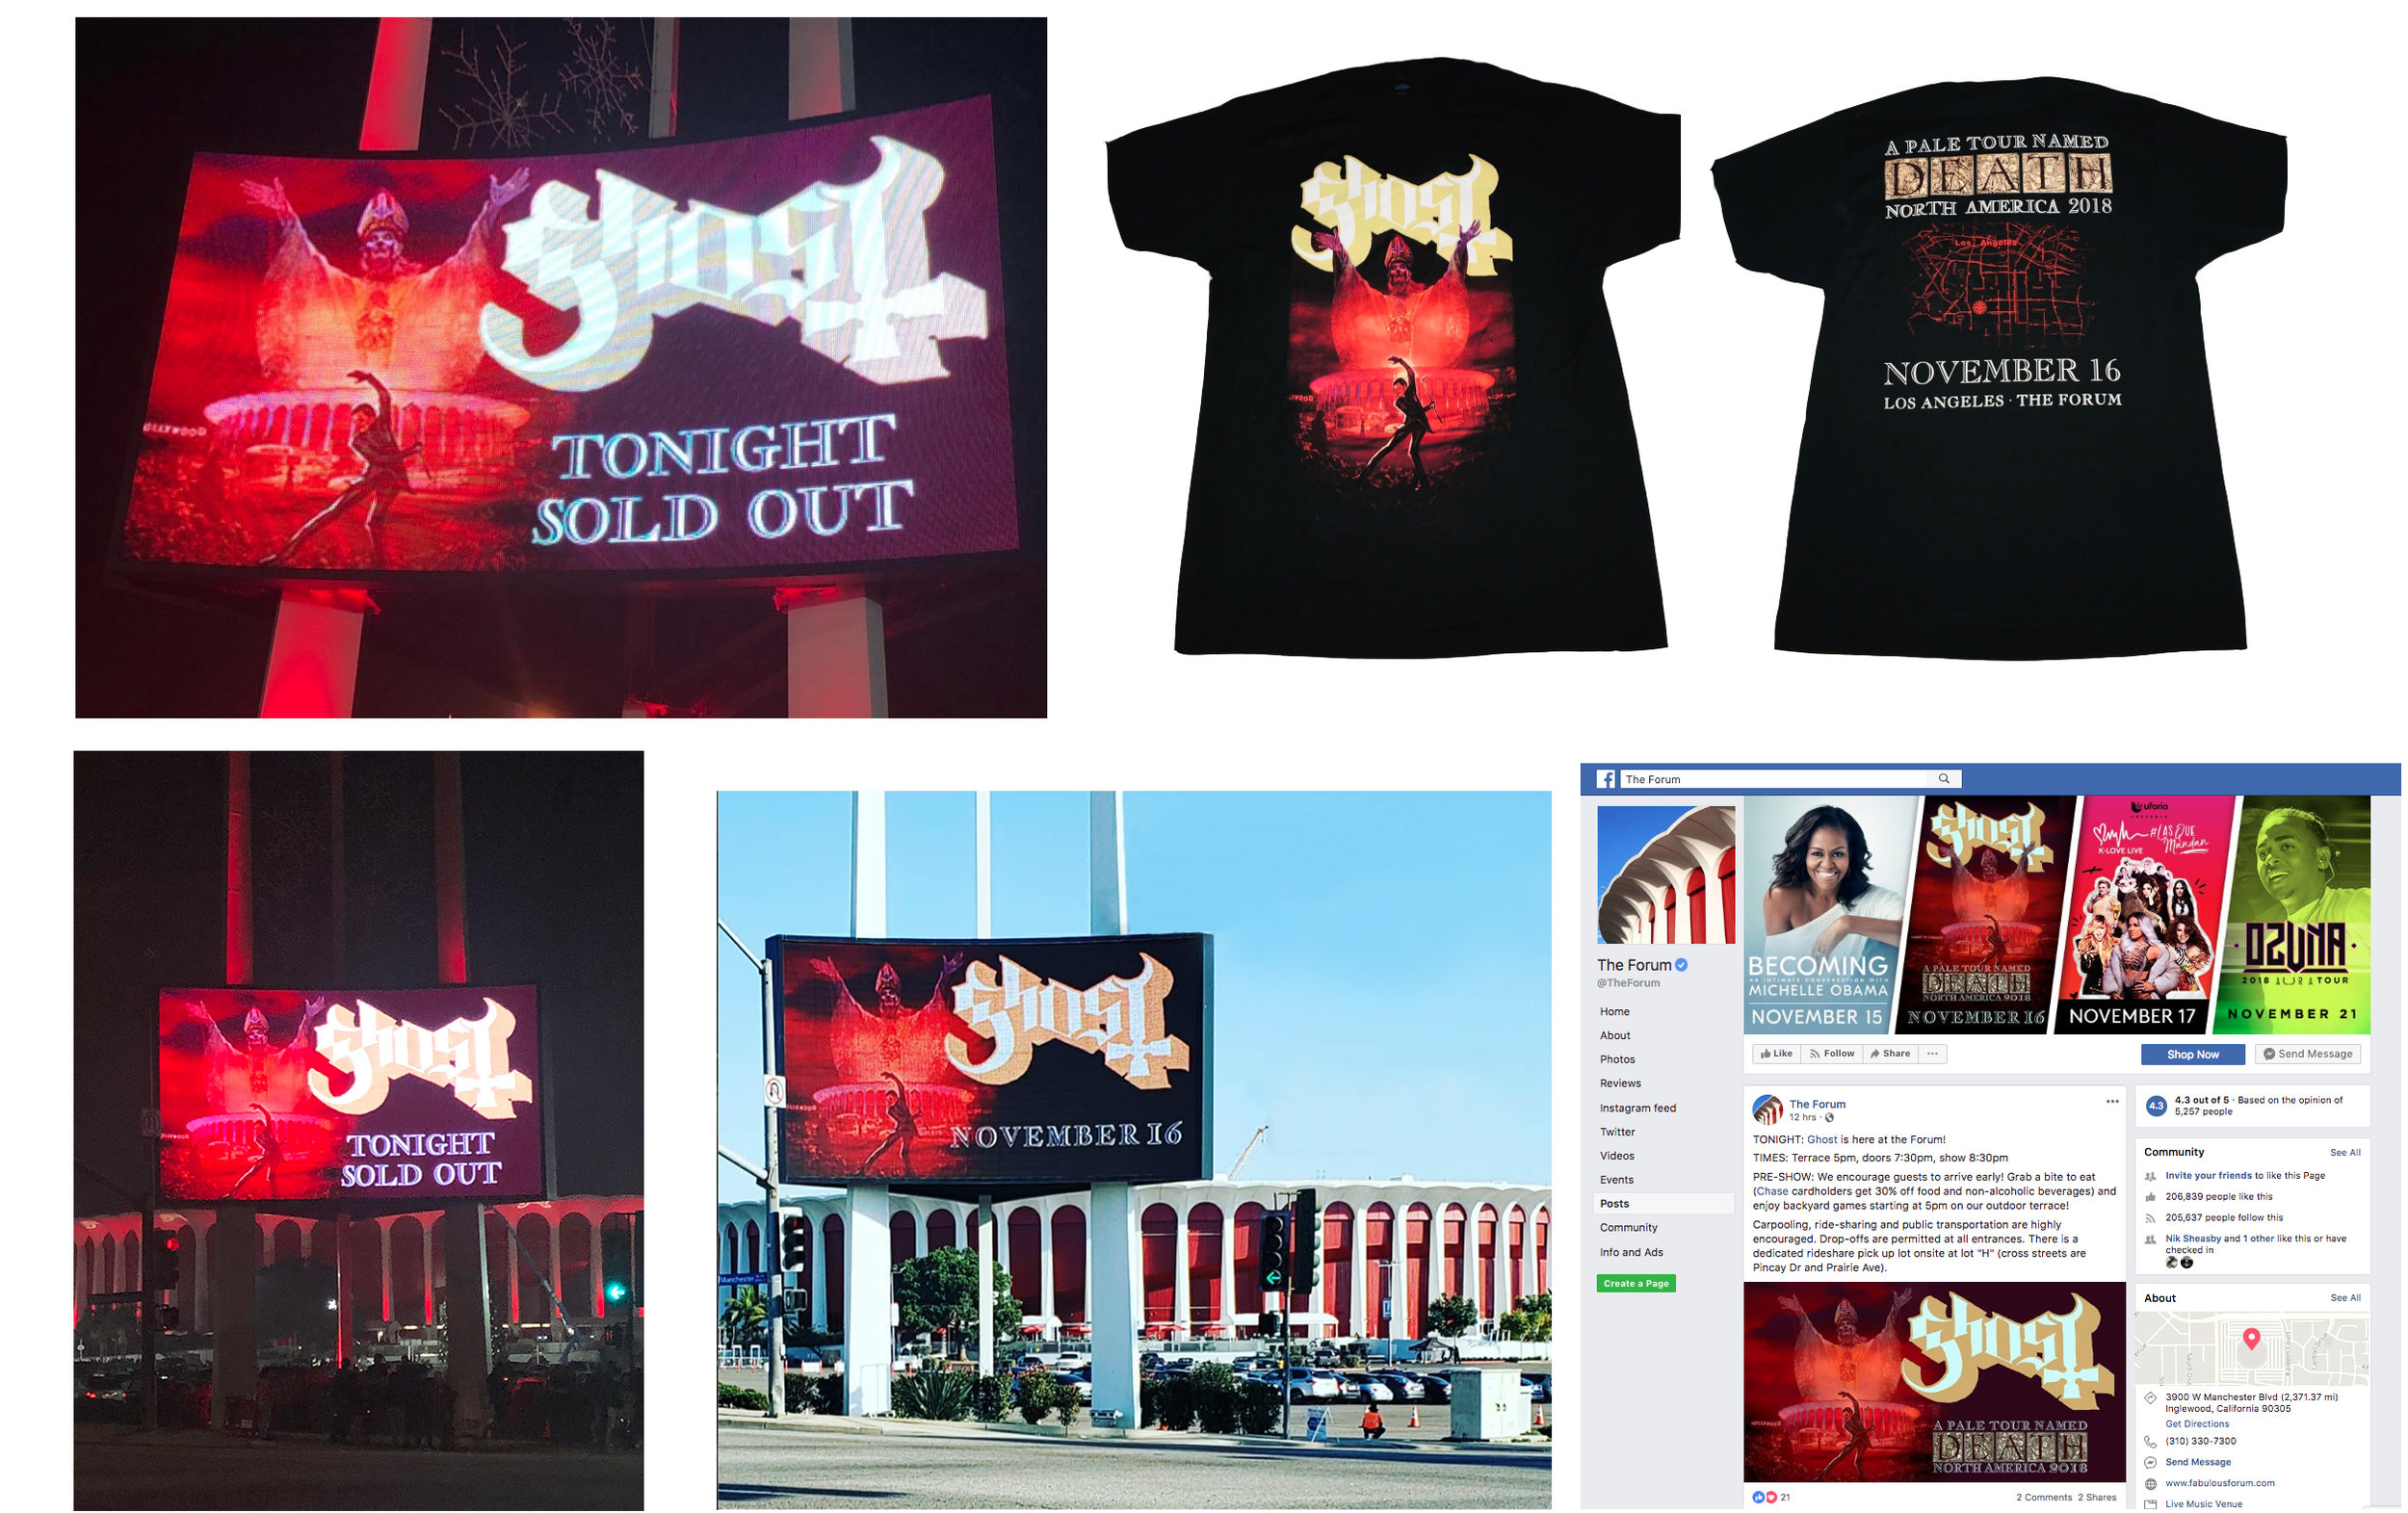   GHOST | Los Angeles Forum | November 16, 2018   Official limited edition concert t-shirt and billboard/marquee graphics     